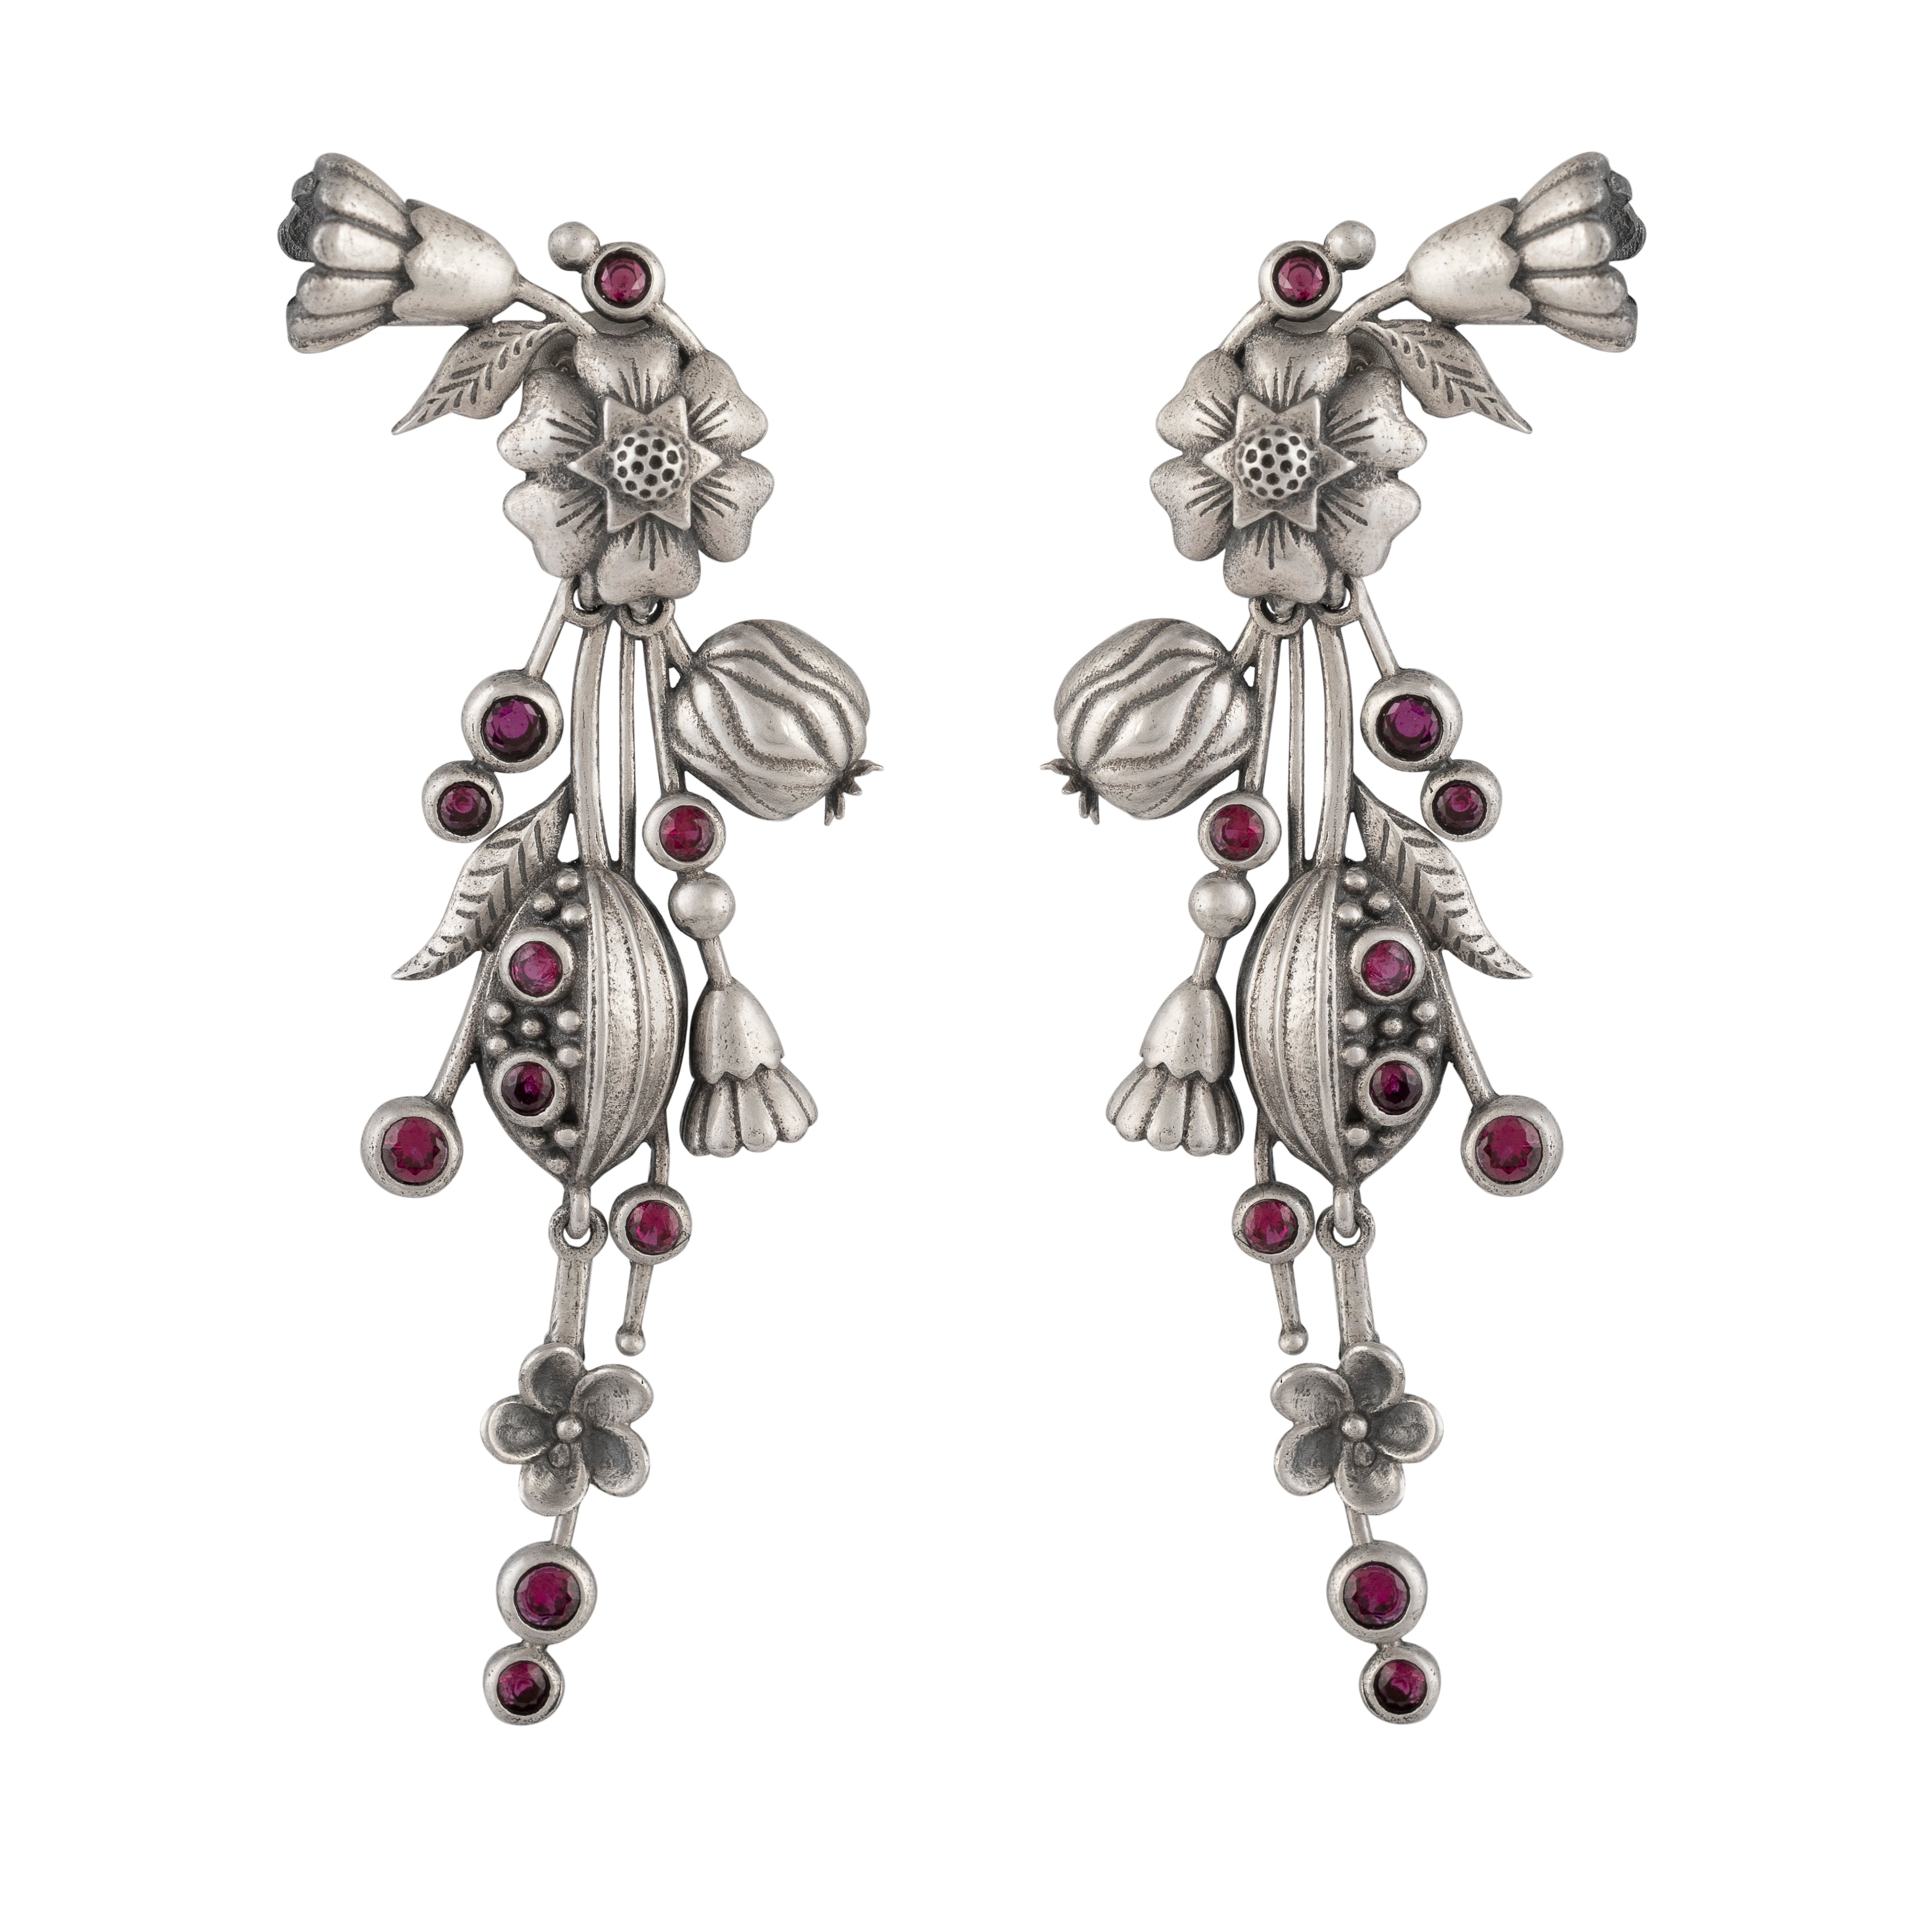 William Morris - Blossom Silver Dangling Earrings by Moha